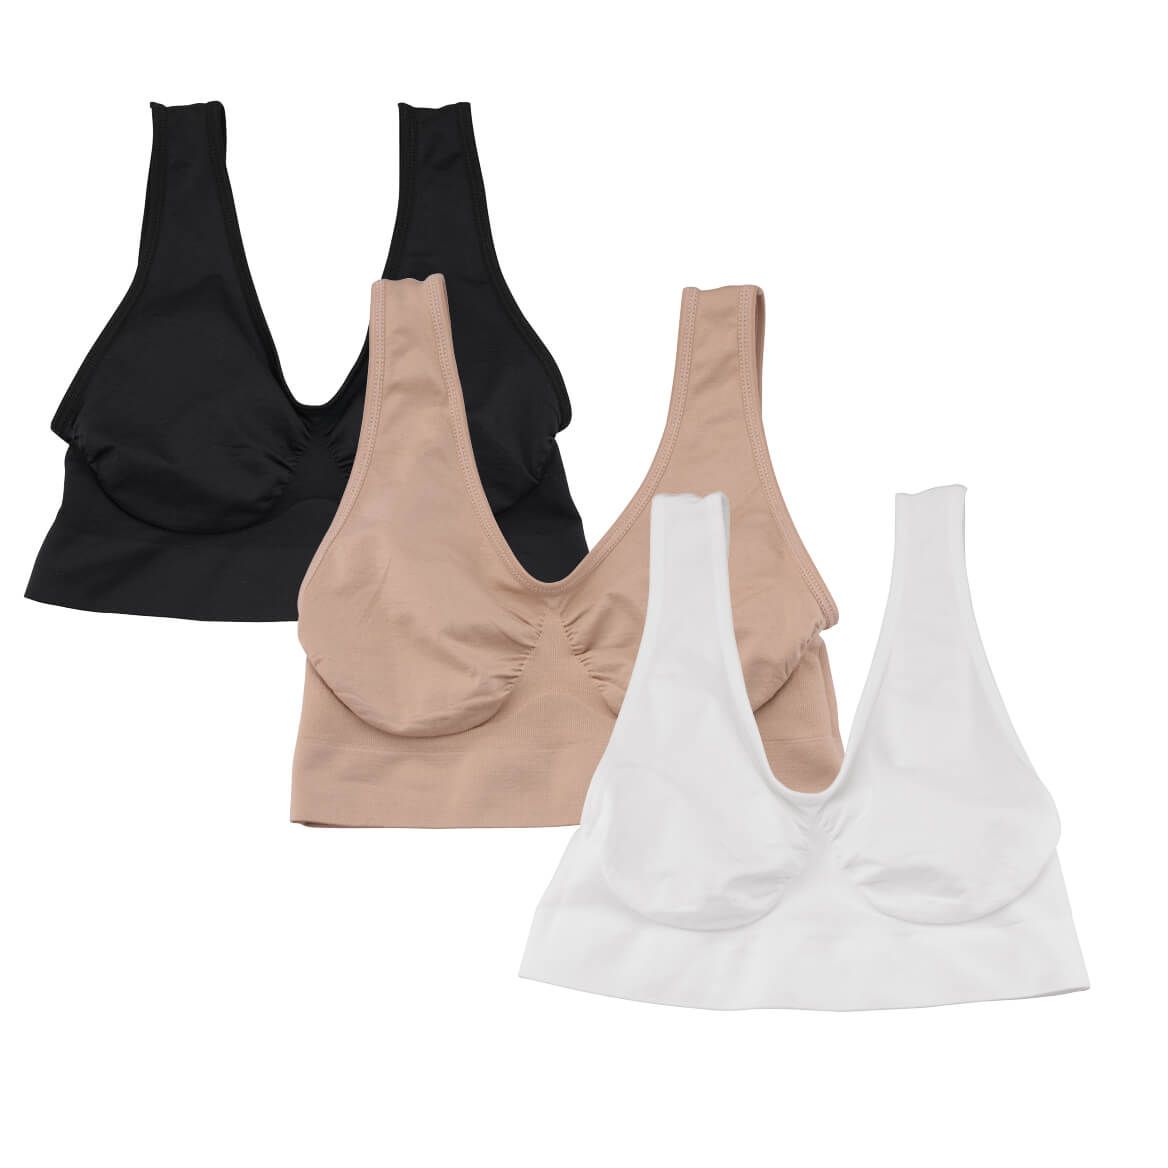 Everyday Seamless Bras by Easy Comforts Style™, Set of 3 + '-' + 354024